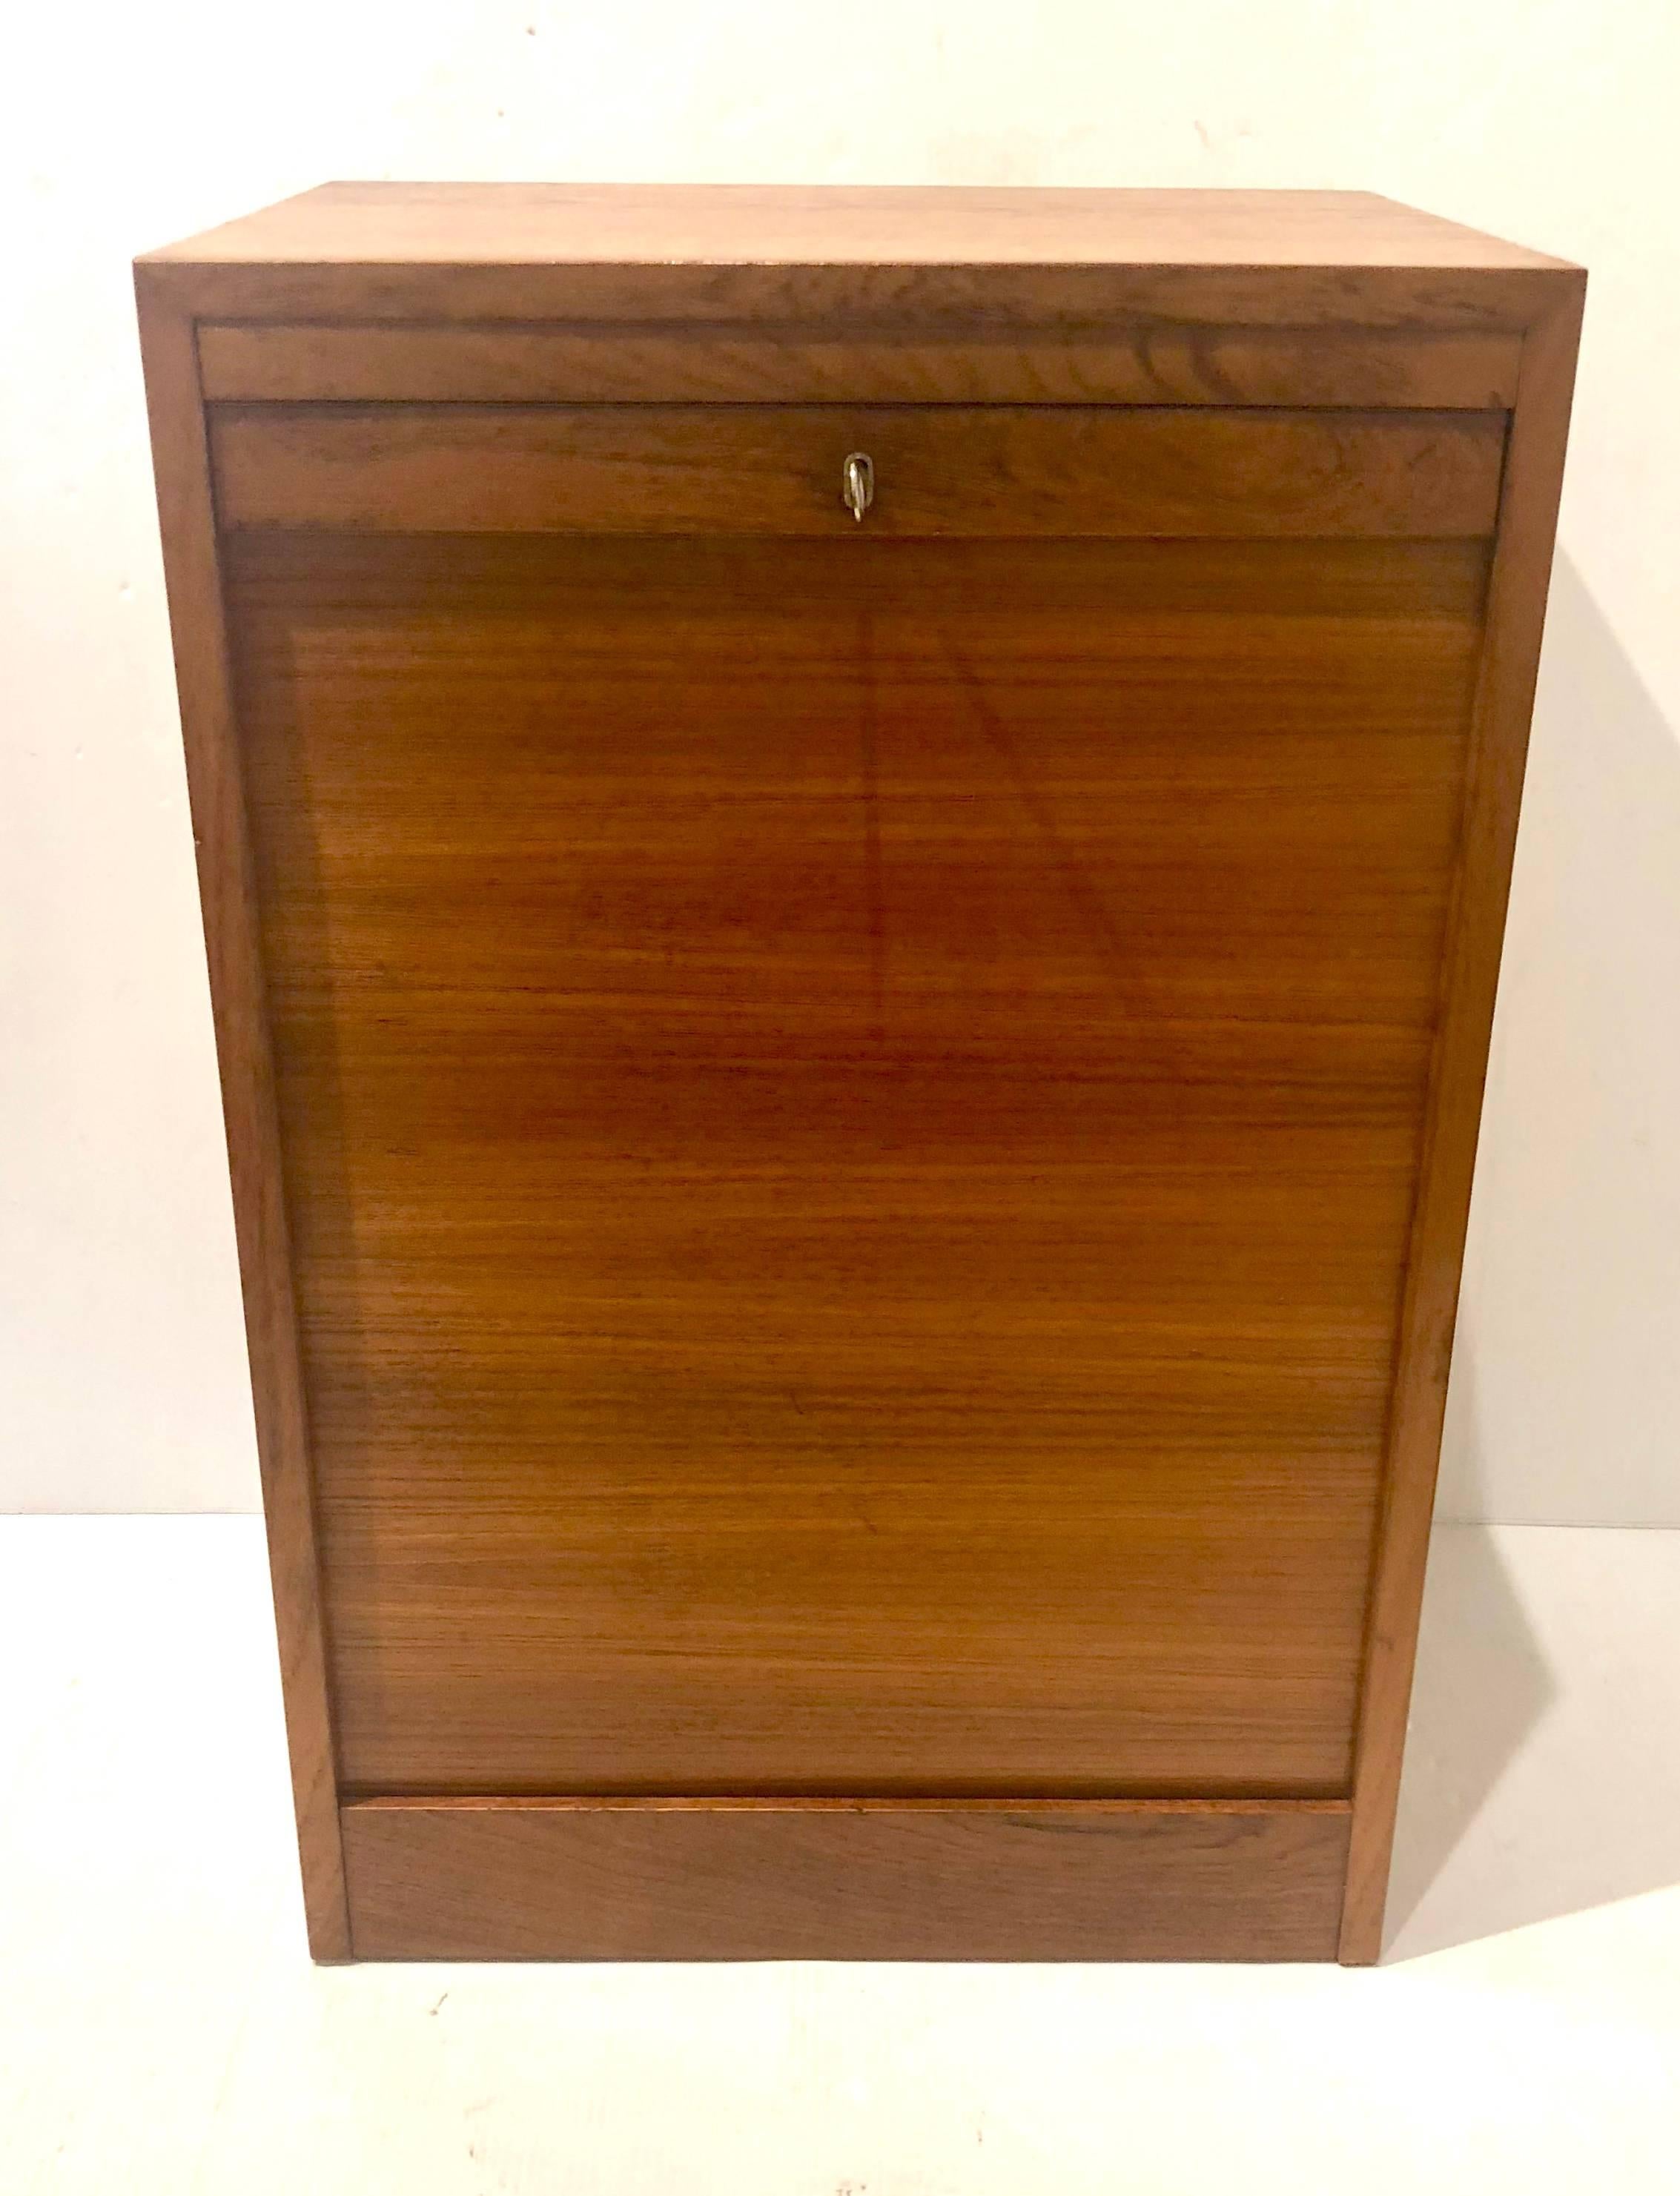 Versatile file cabinet or artist cabinet in original finish teak with lock key, and tambour door, drawers finish in birch wood, hard to find piece, each drawer. Measures: 12